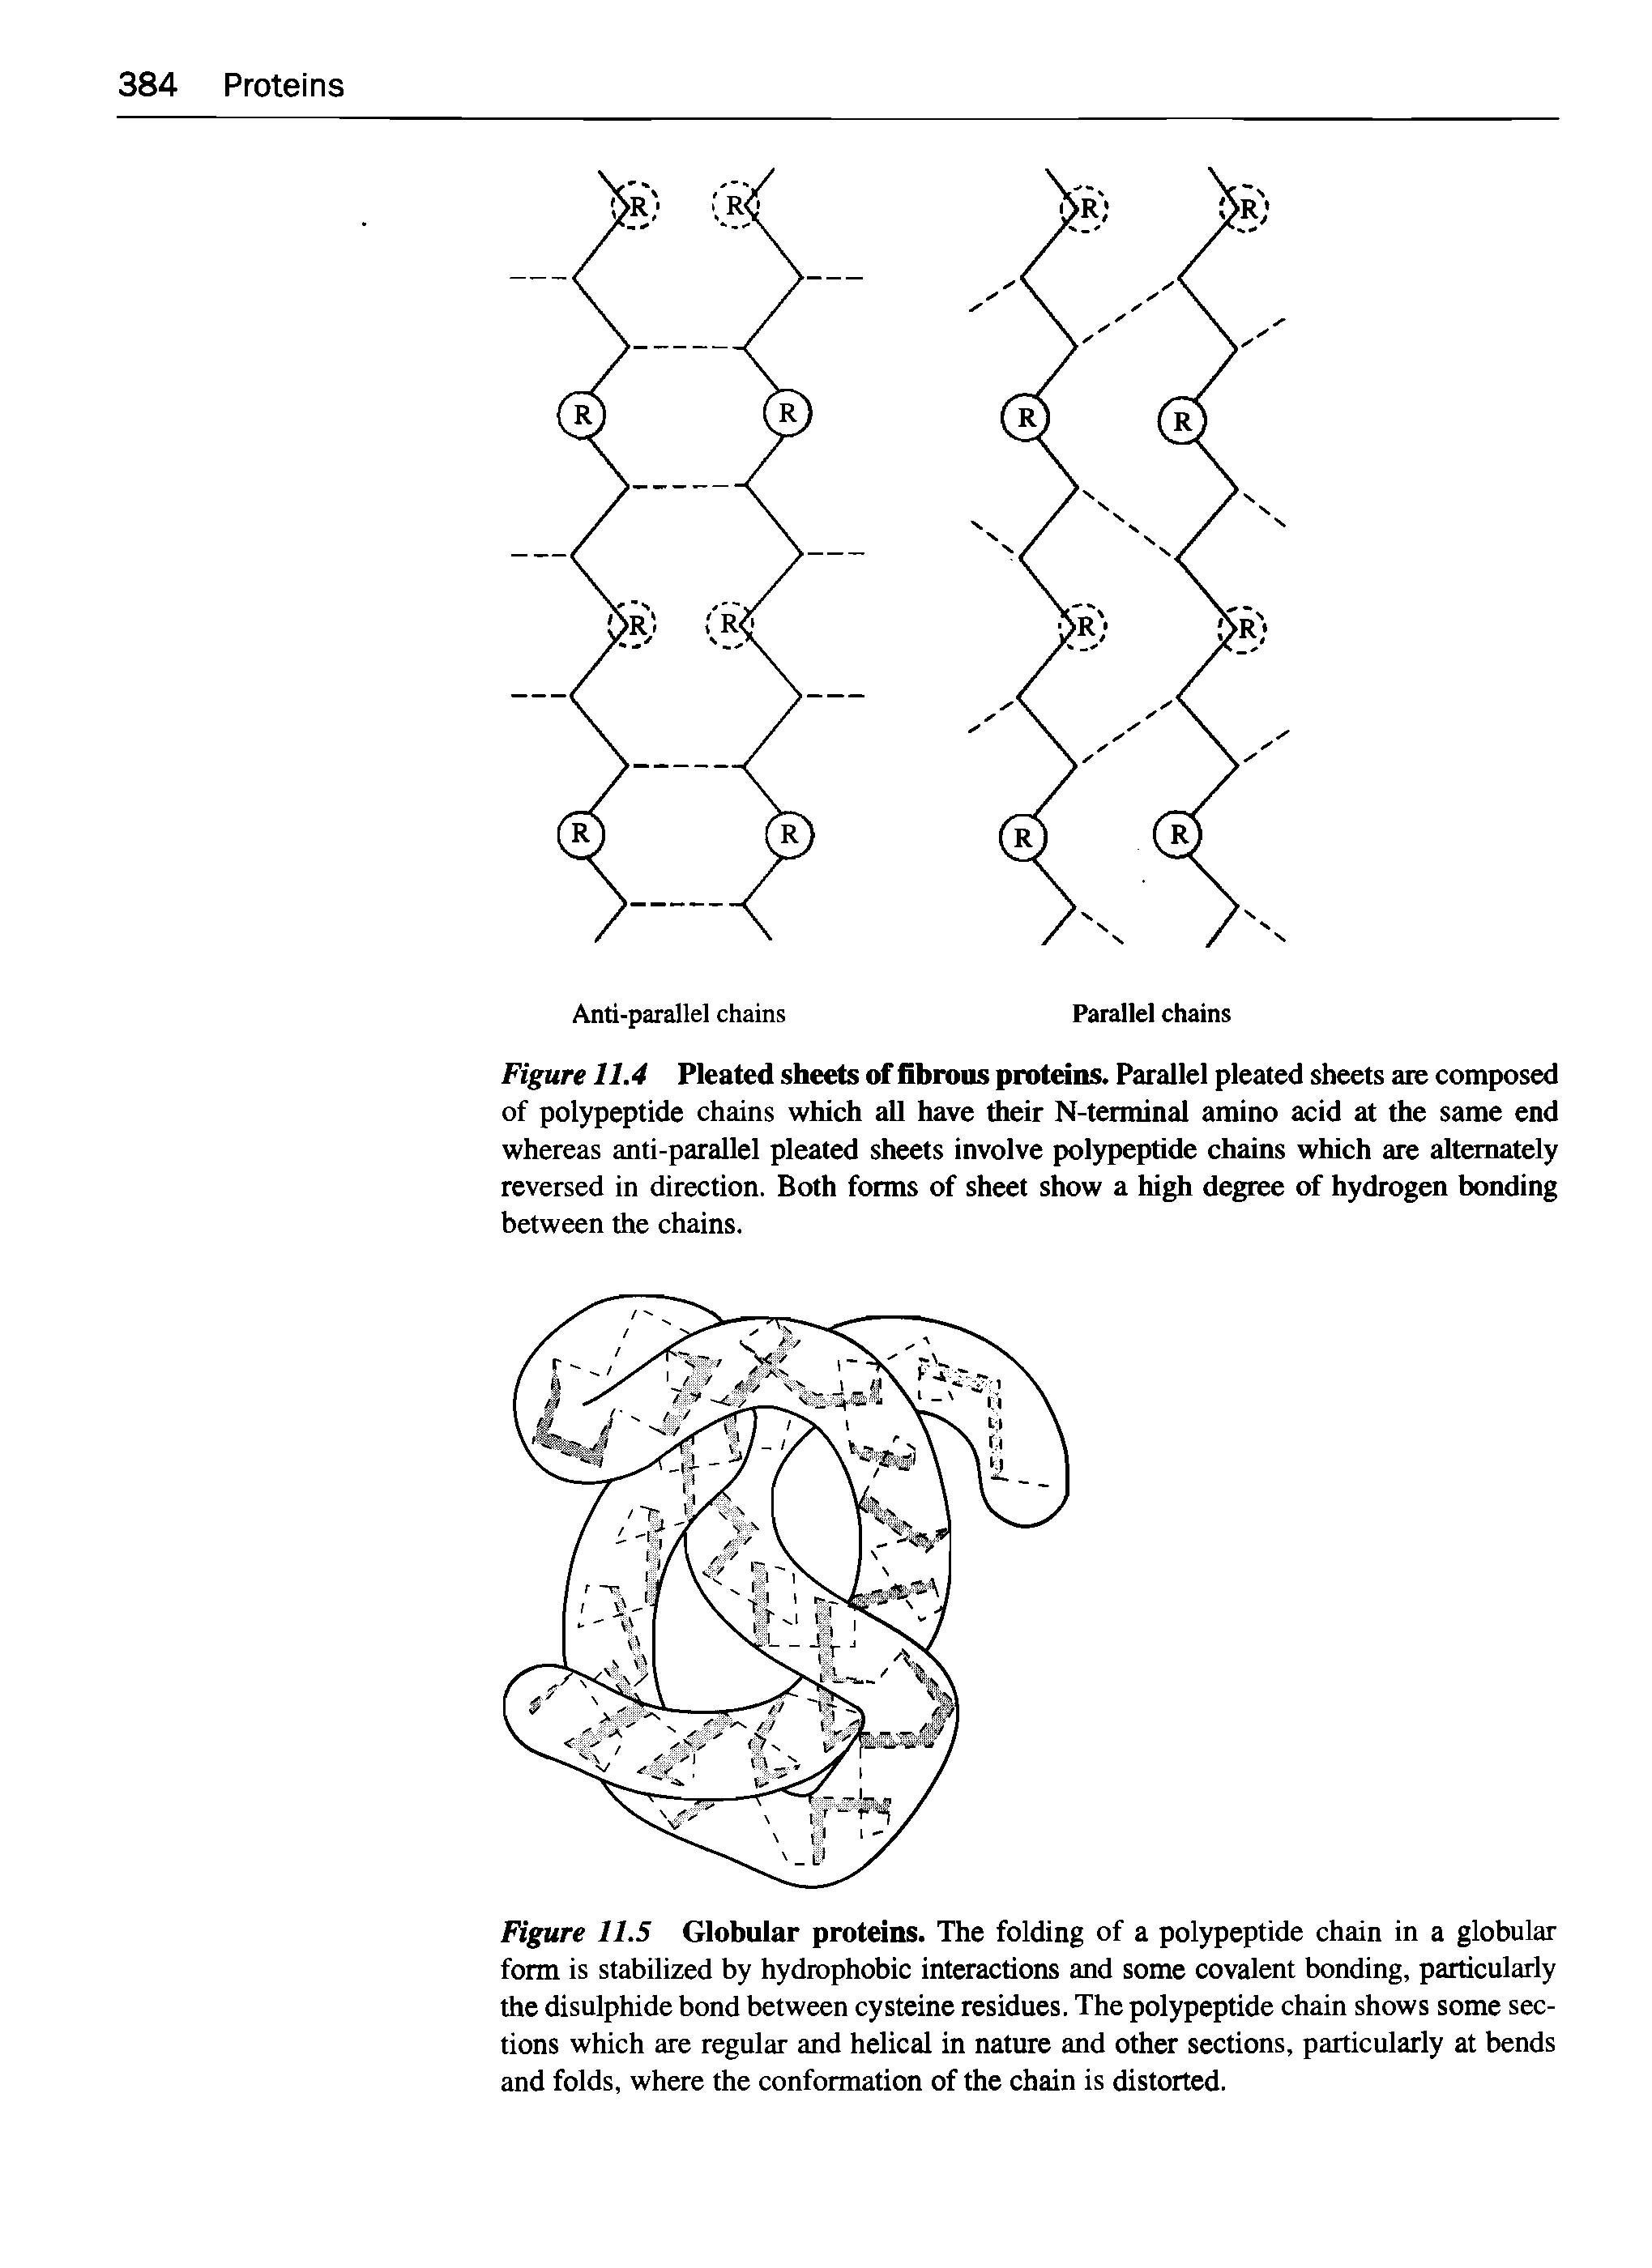 Figure 11.5 Globular proteins. The folding of a polypeptide chain in a globular form is stabilized by hydrophobic interactions and some covalent bonding, particularly the disulphide bond between cysteine residues. The polypeptide chain shows some sections which are regular and helical in nature and other sections, particularly at bends and folds, where the conformation of the chain is distorted.